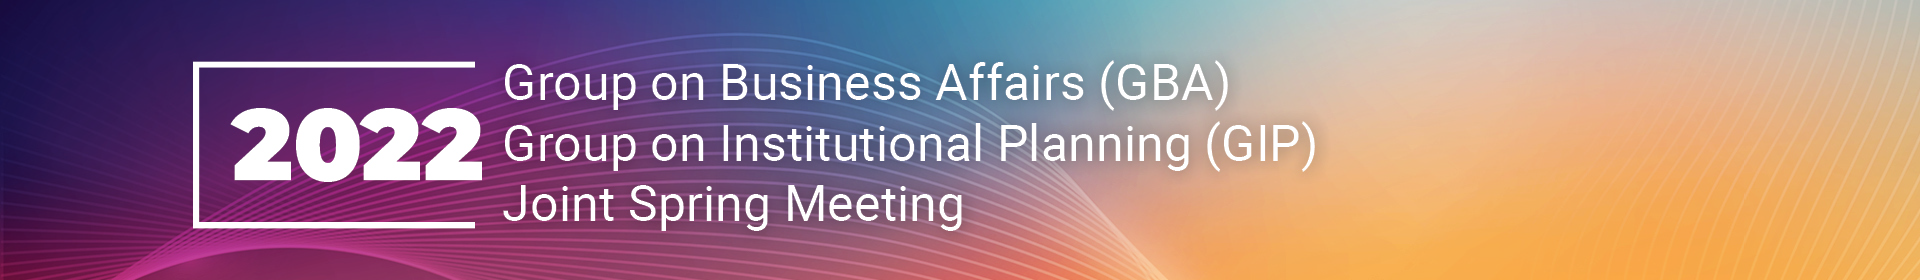 Group on Business Affairs (GBA) & Group on Institutional Planning (GIP) 2022 Joint Spring Meeting Event Banner